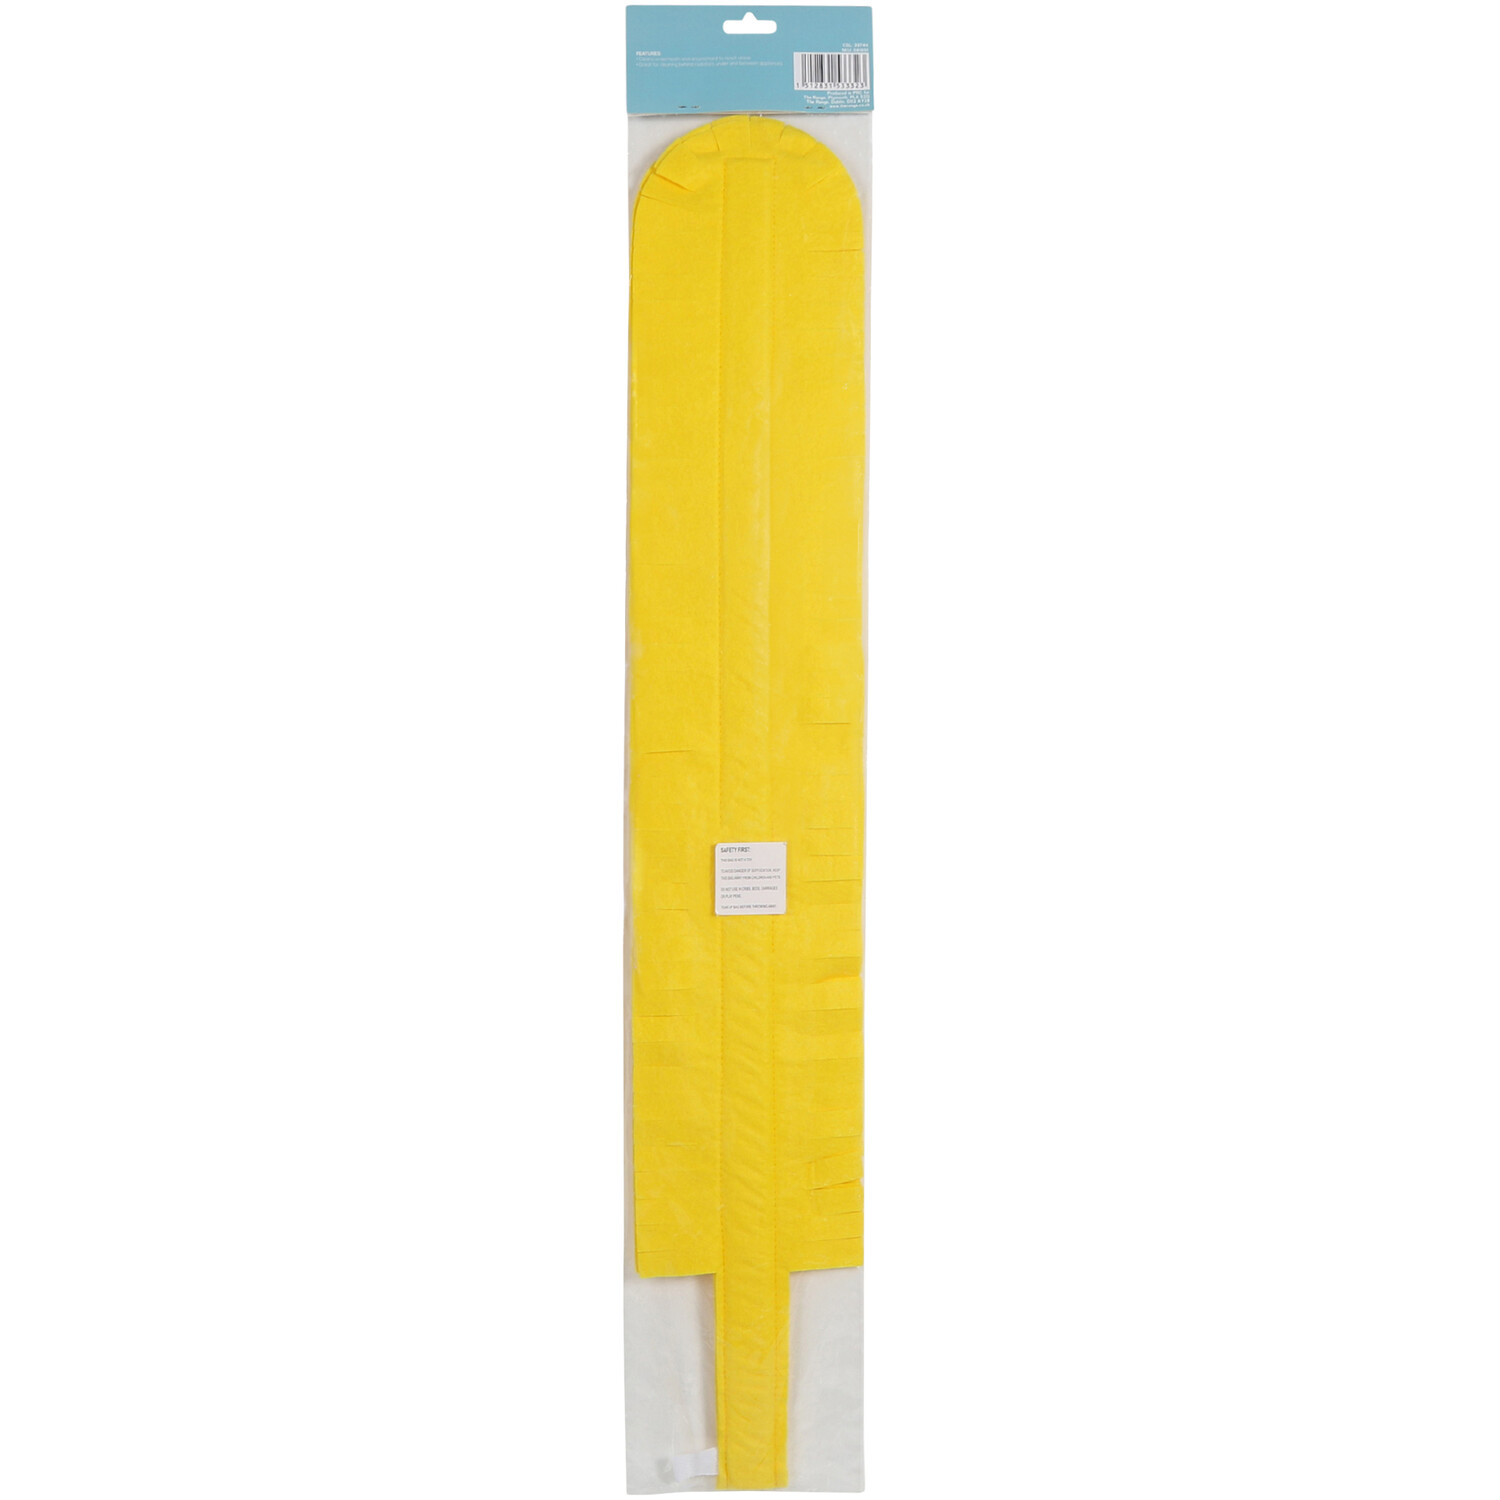 My Home Flexible Cleaning Duster - Yellow Image 2